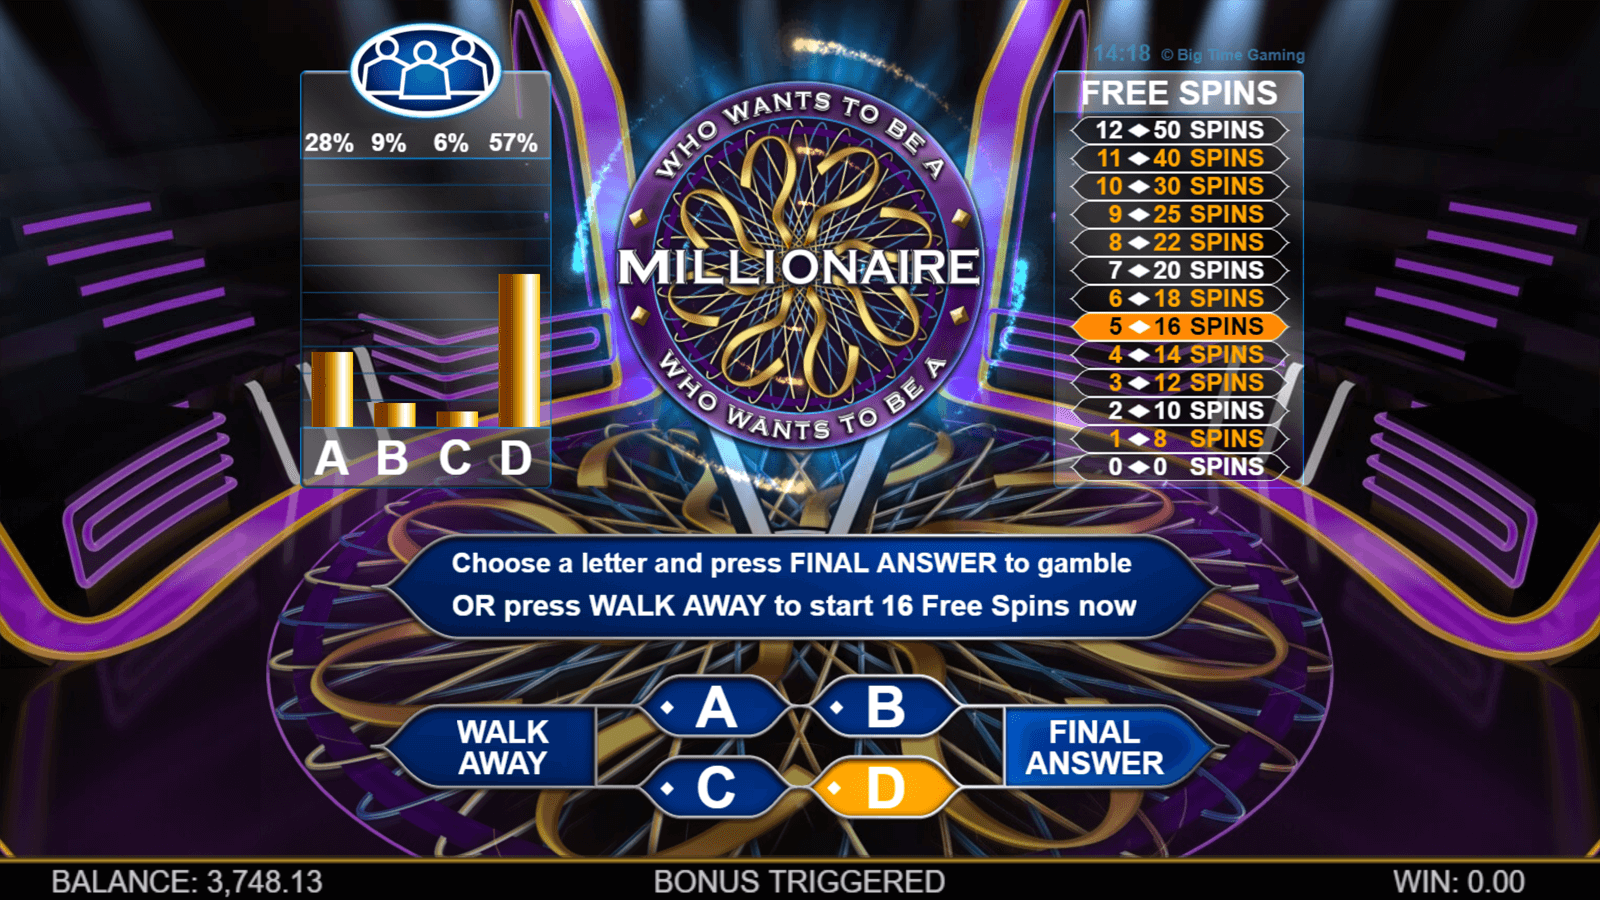 Who Wants To Be a Millionaire Megaways 